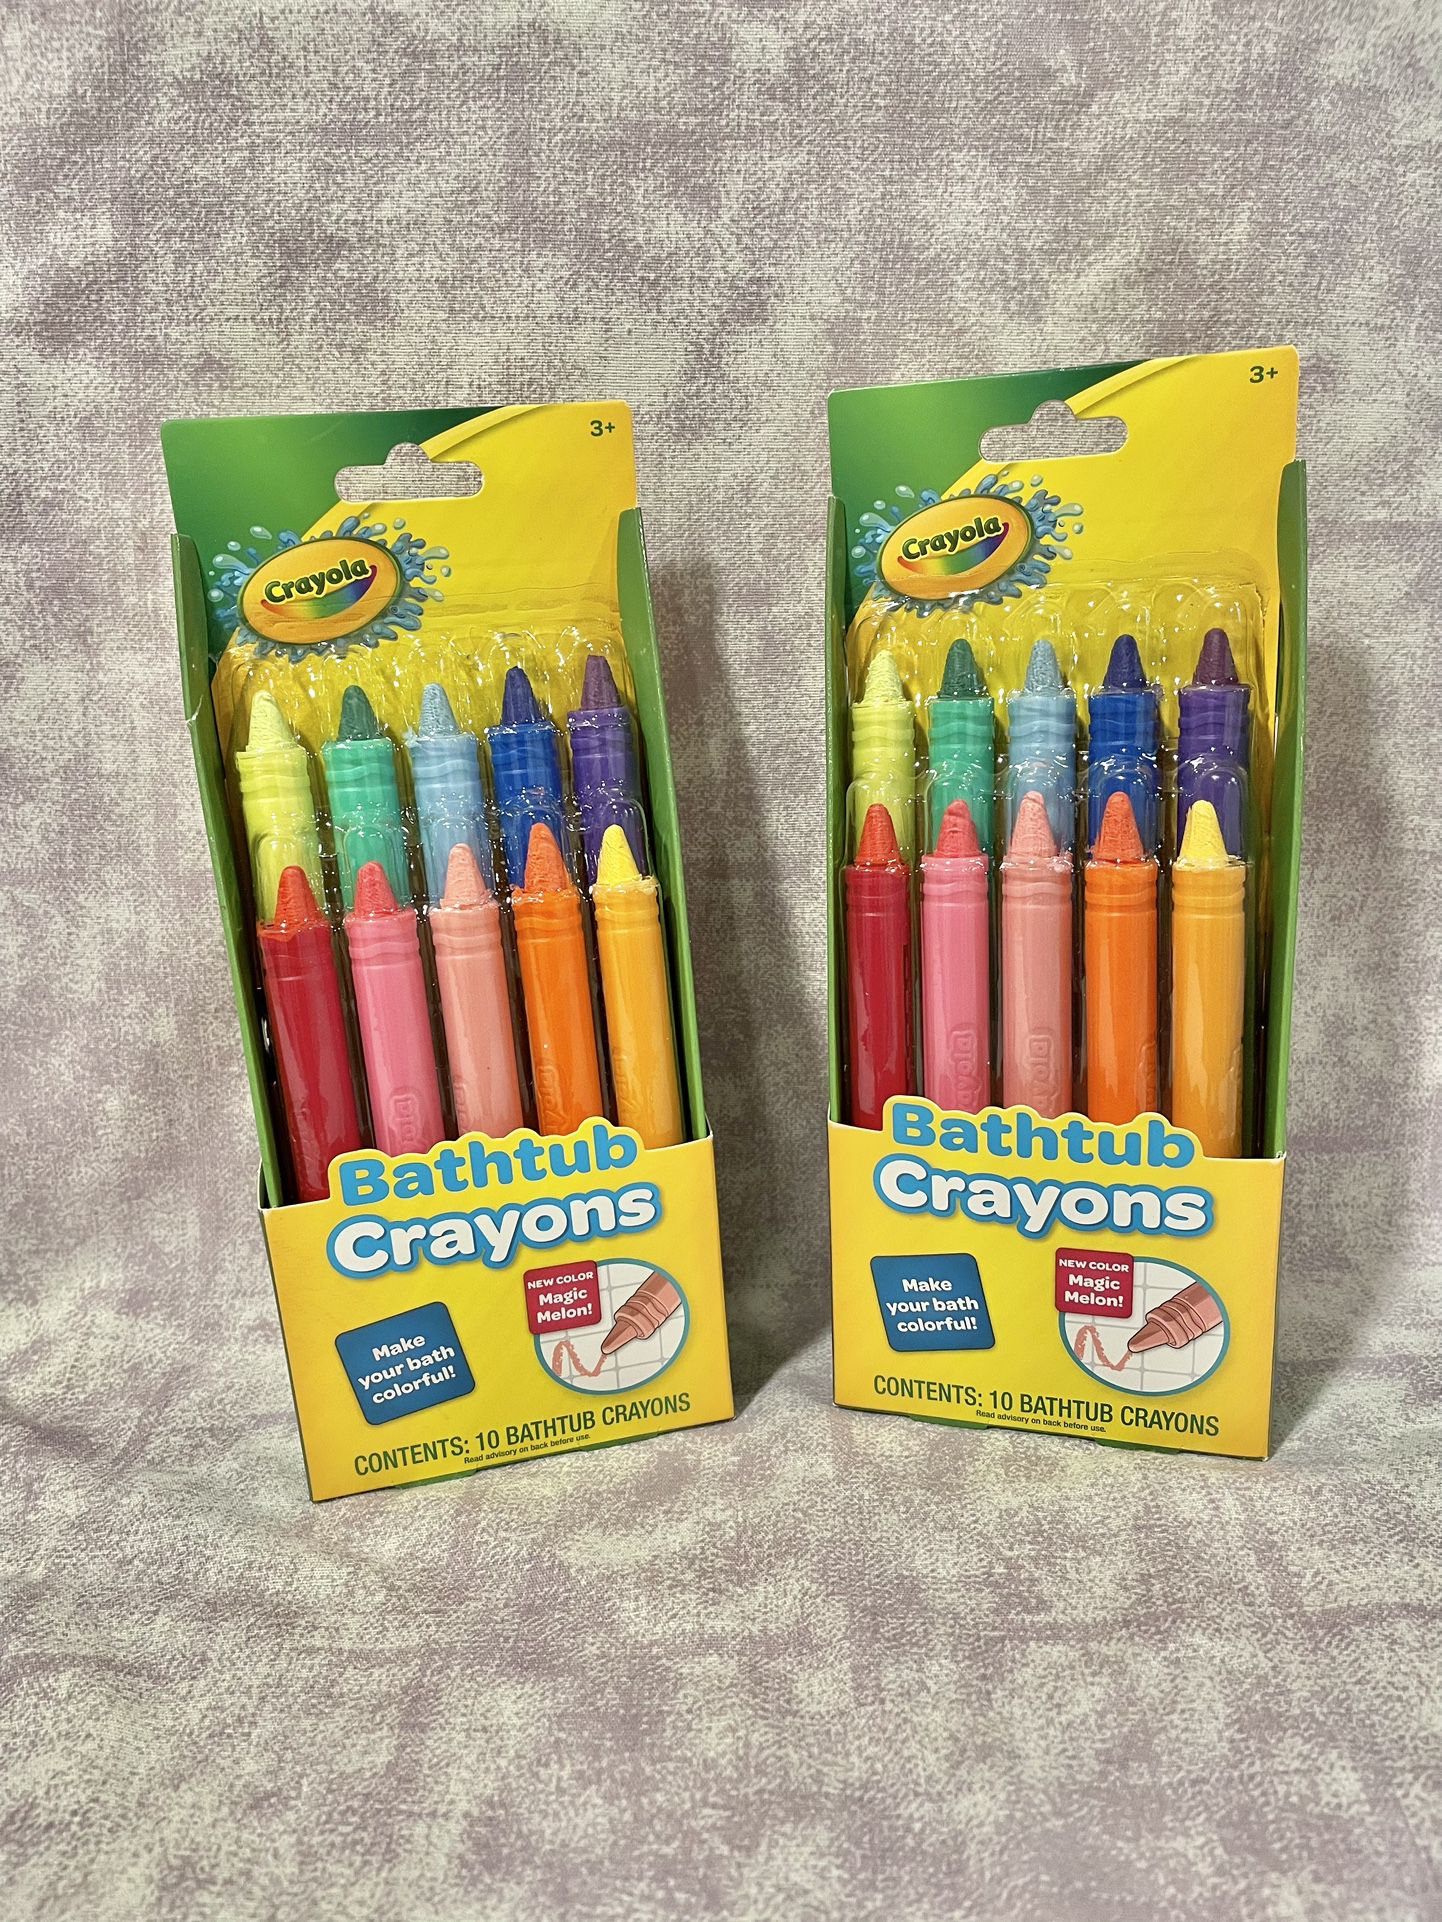 Crayola Bathtub Crayons - New In Packaging for Sale in Buffalo, NY - OfferUp